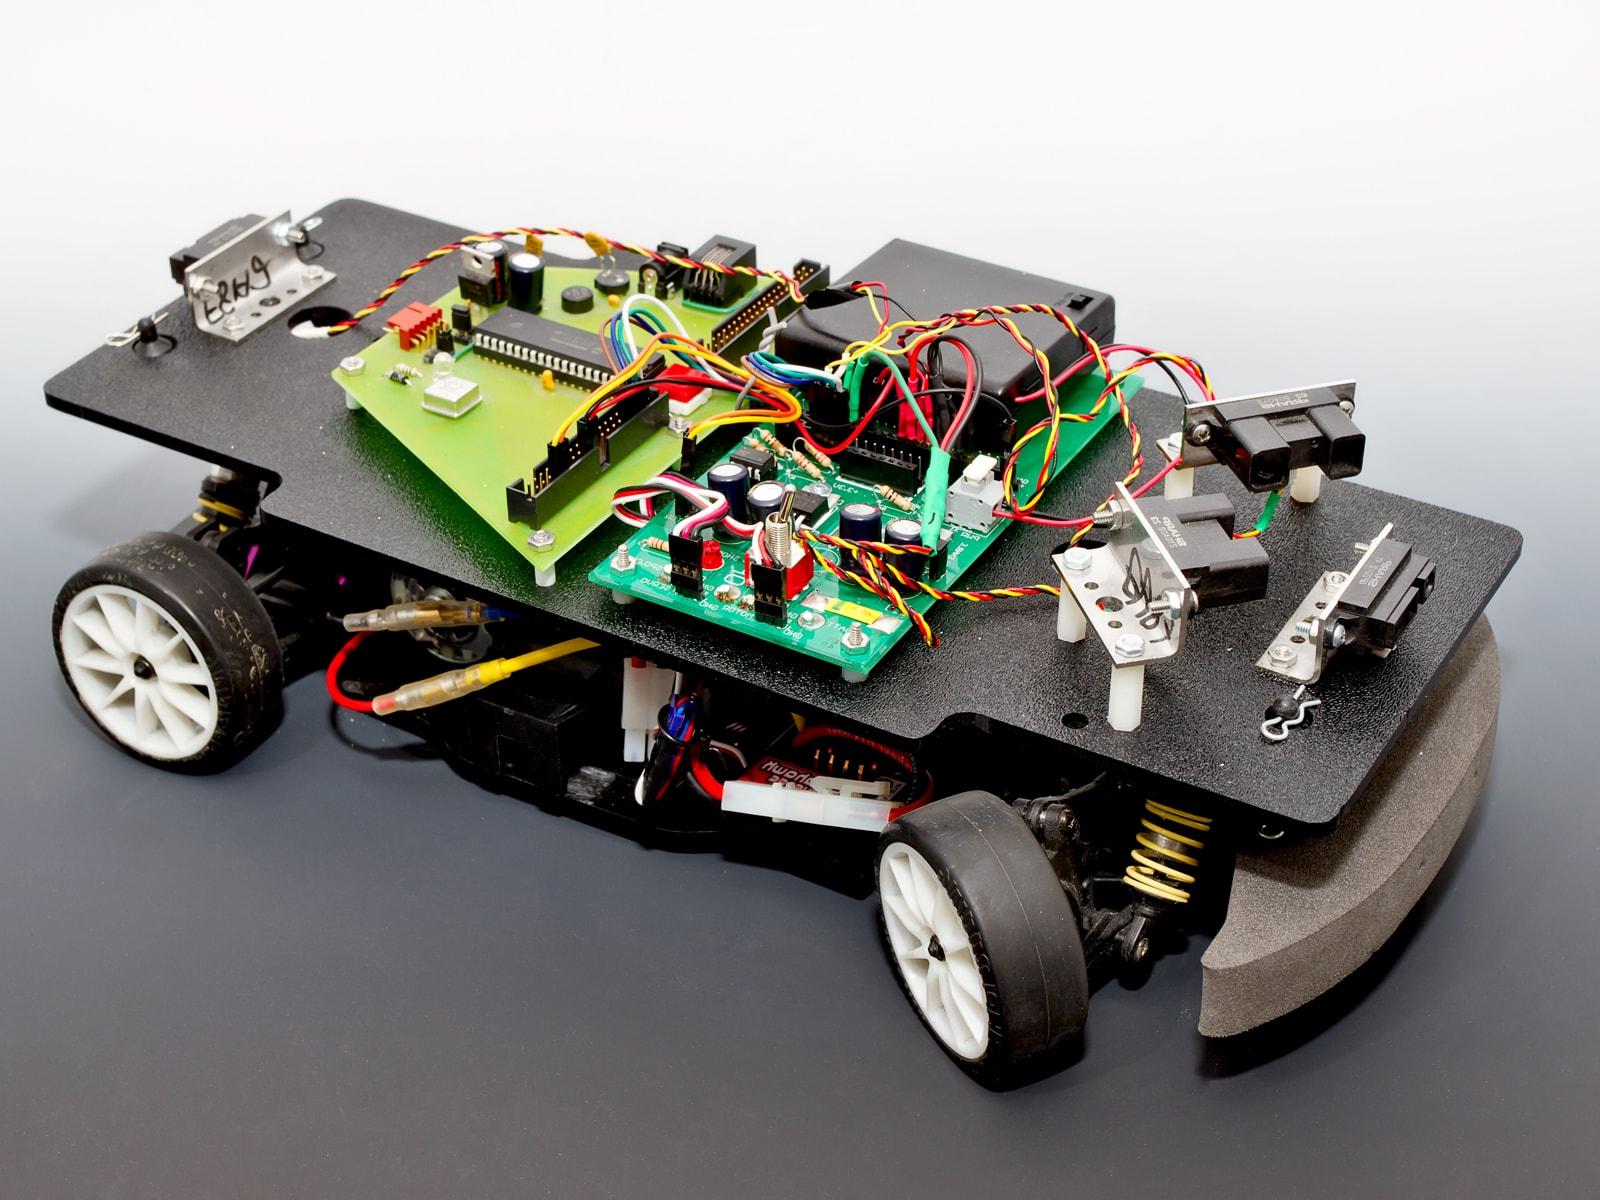 A four wheeled car with infrared sensors and exposed circuitry.